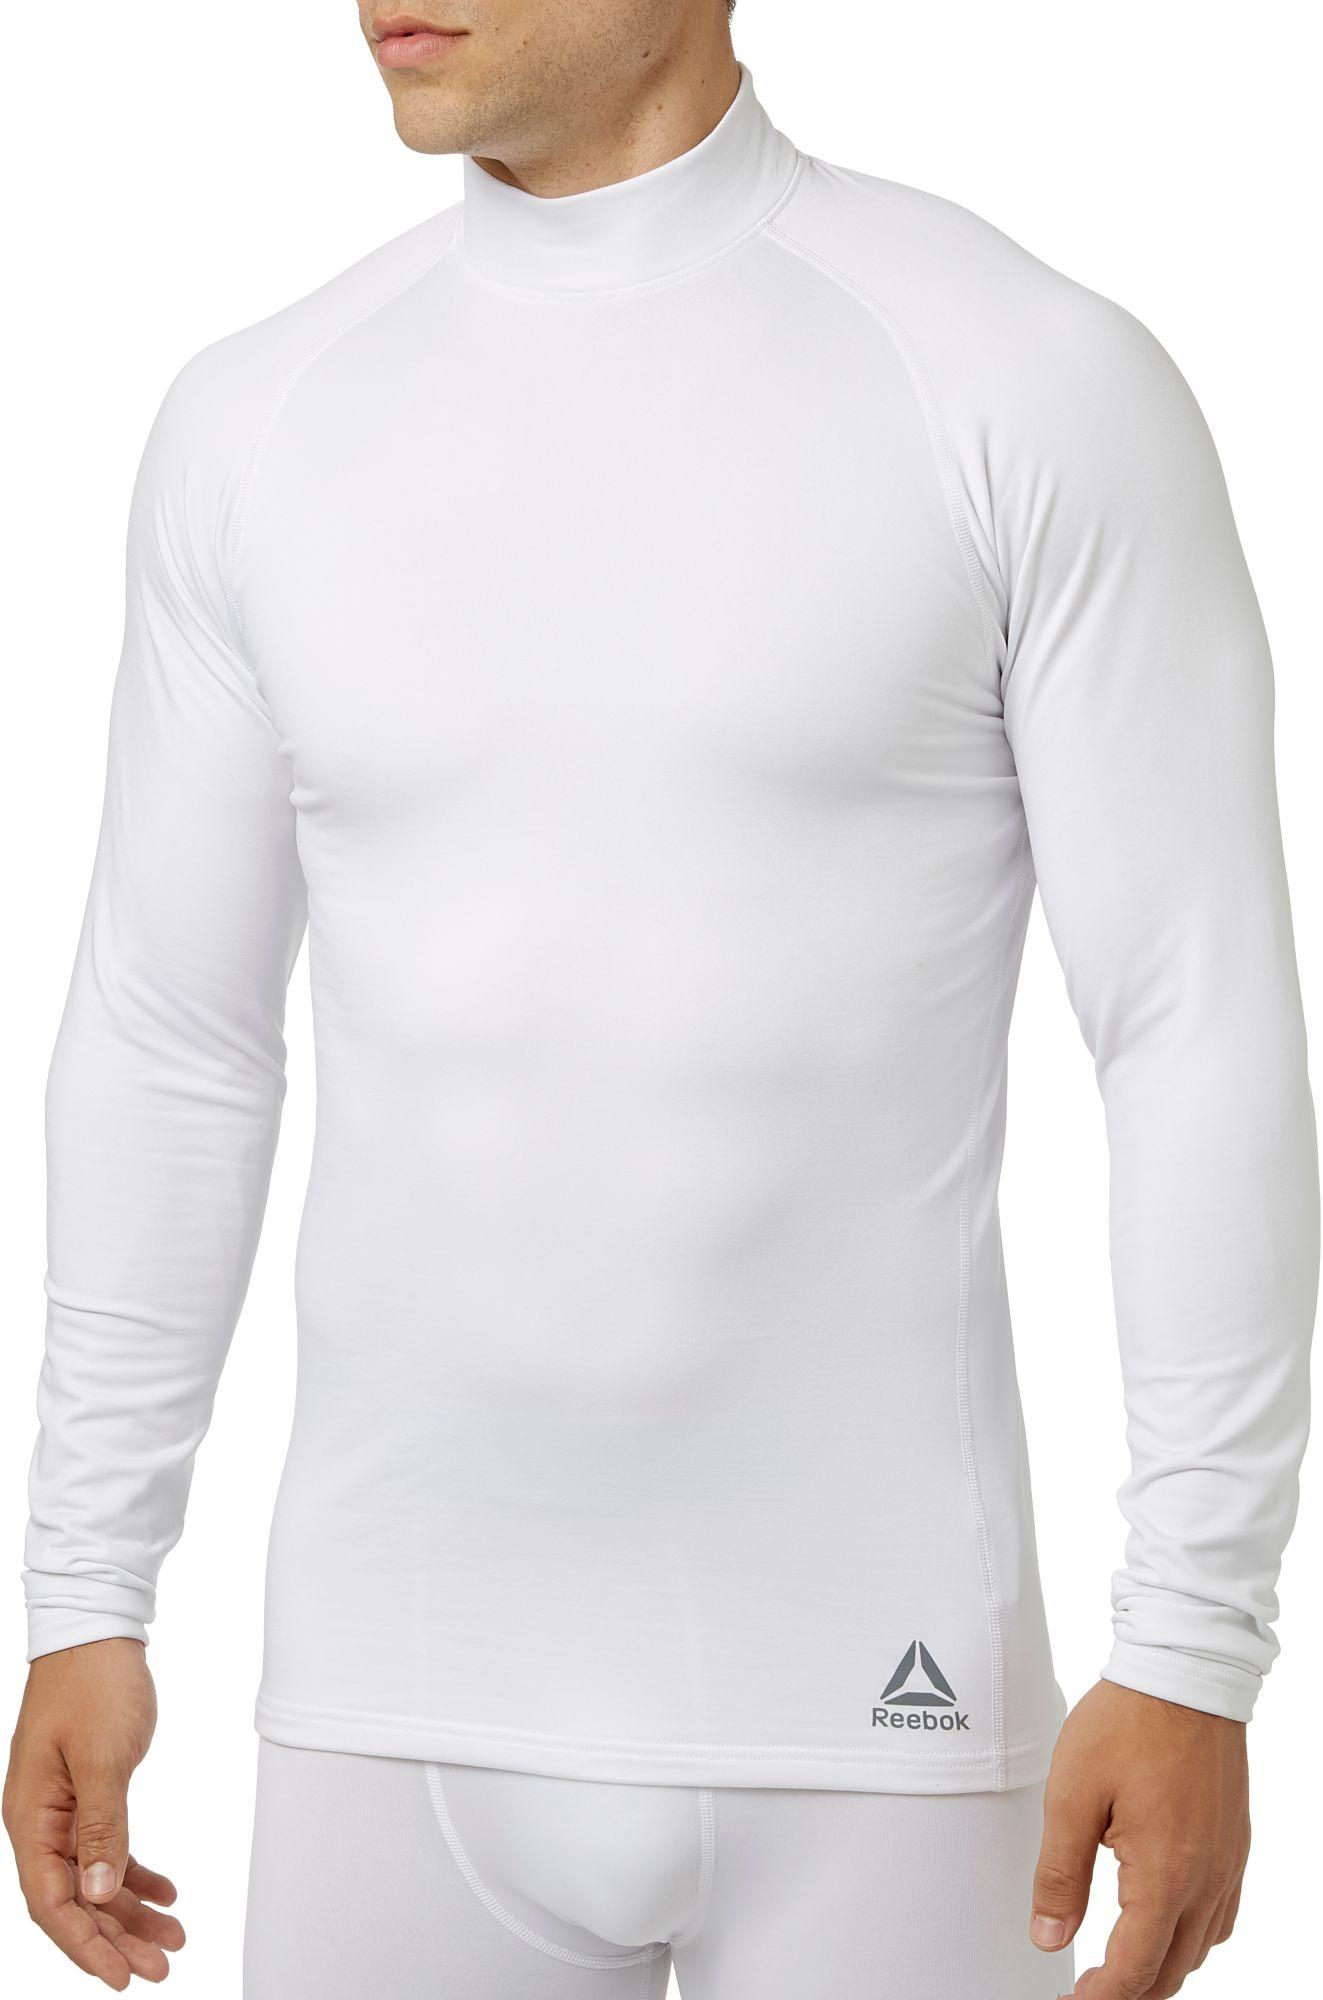 reebok men's crossfit cold weather long sleeve compression shirt